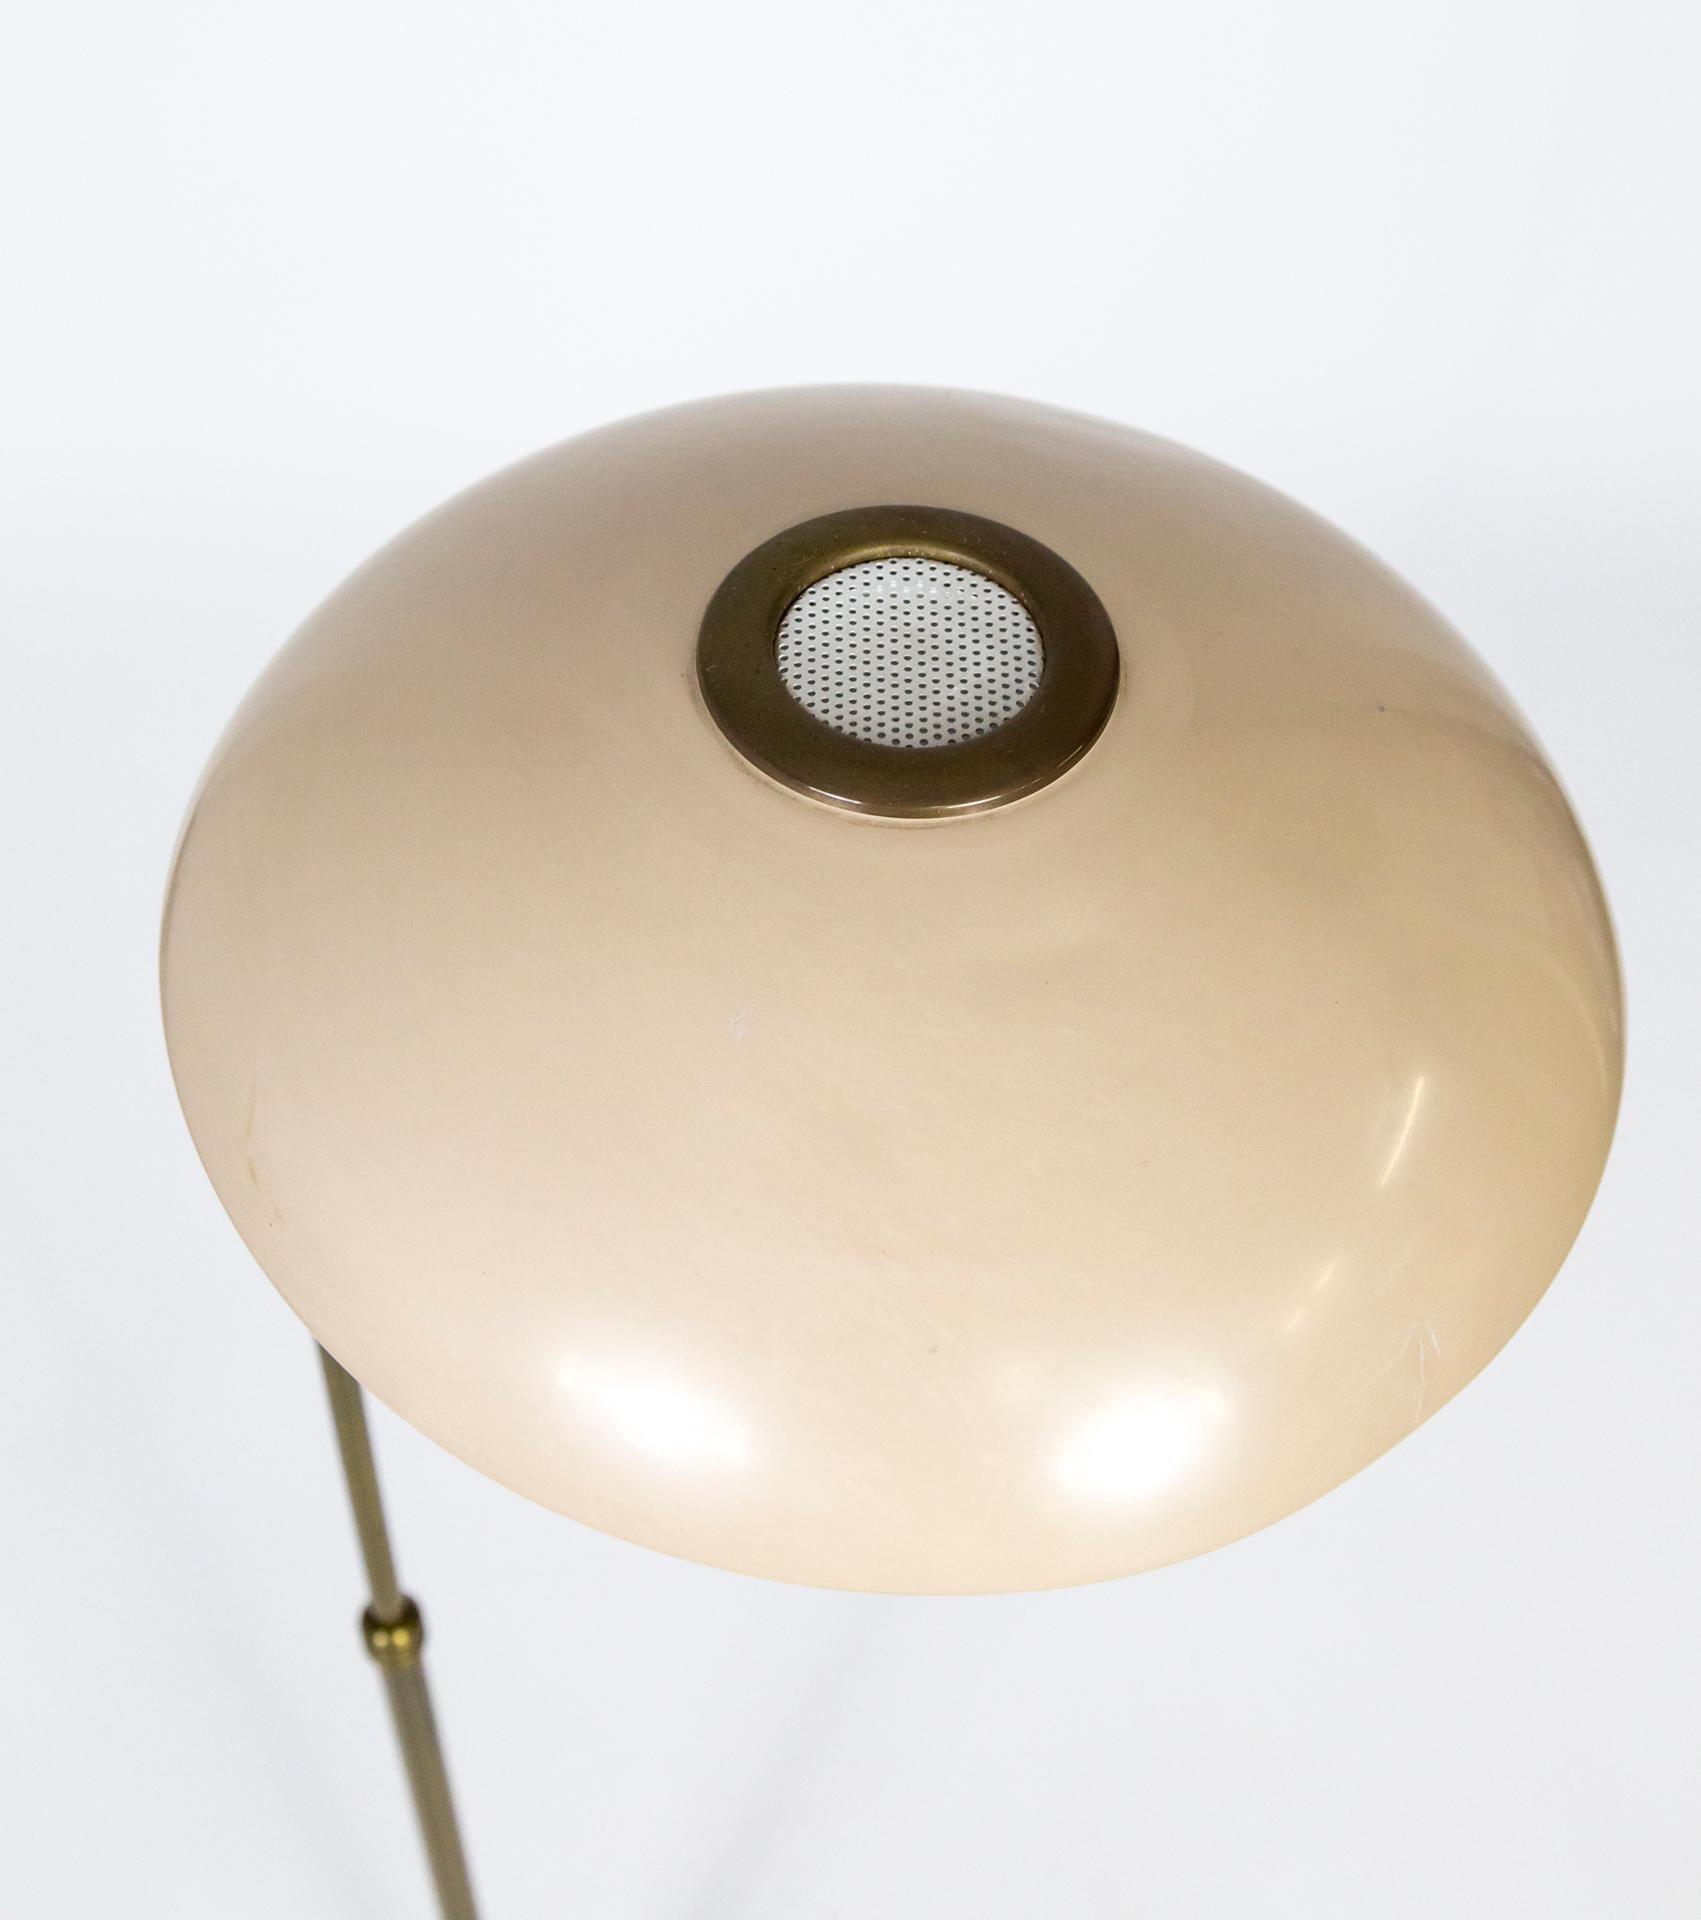 Dazor 1950s Flying Saucer Floor Lamp in Brass & Buff Lacquer 1